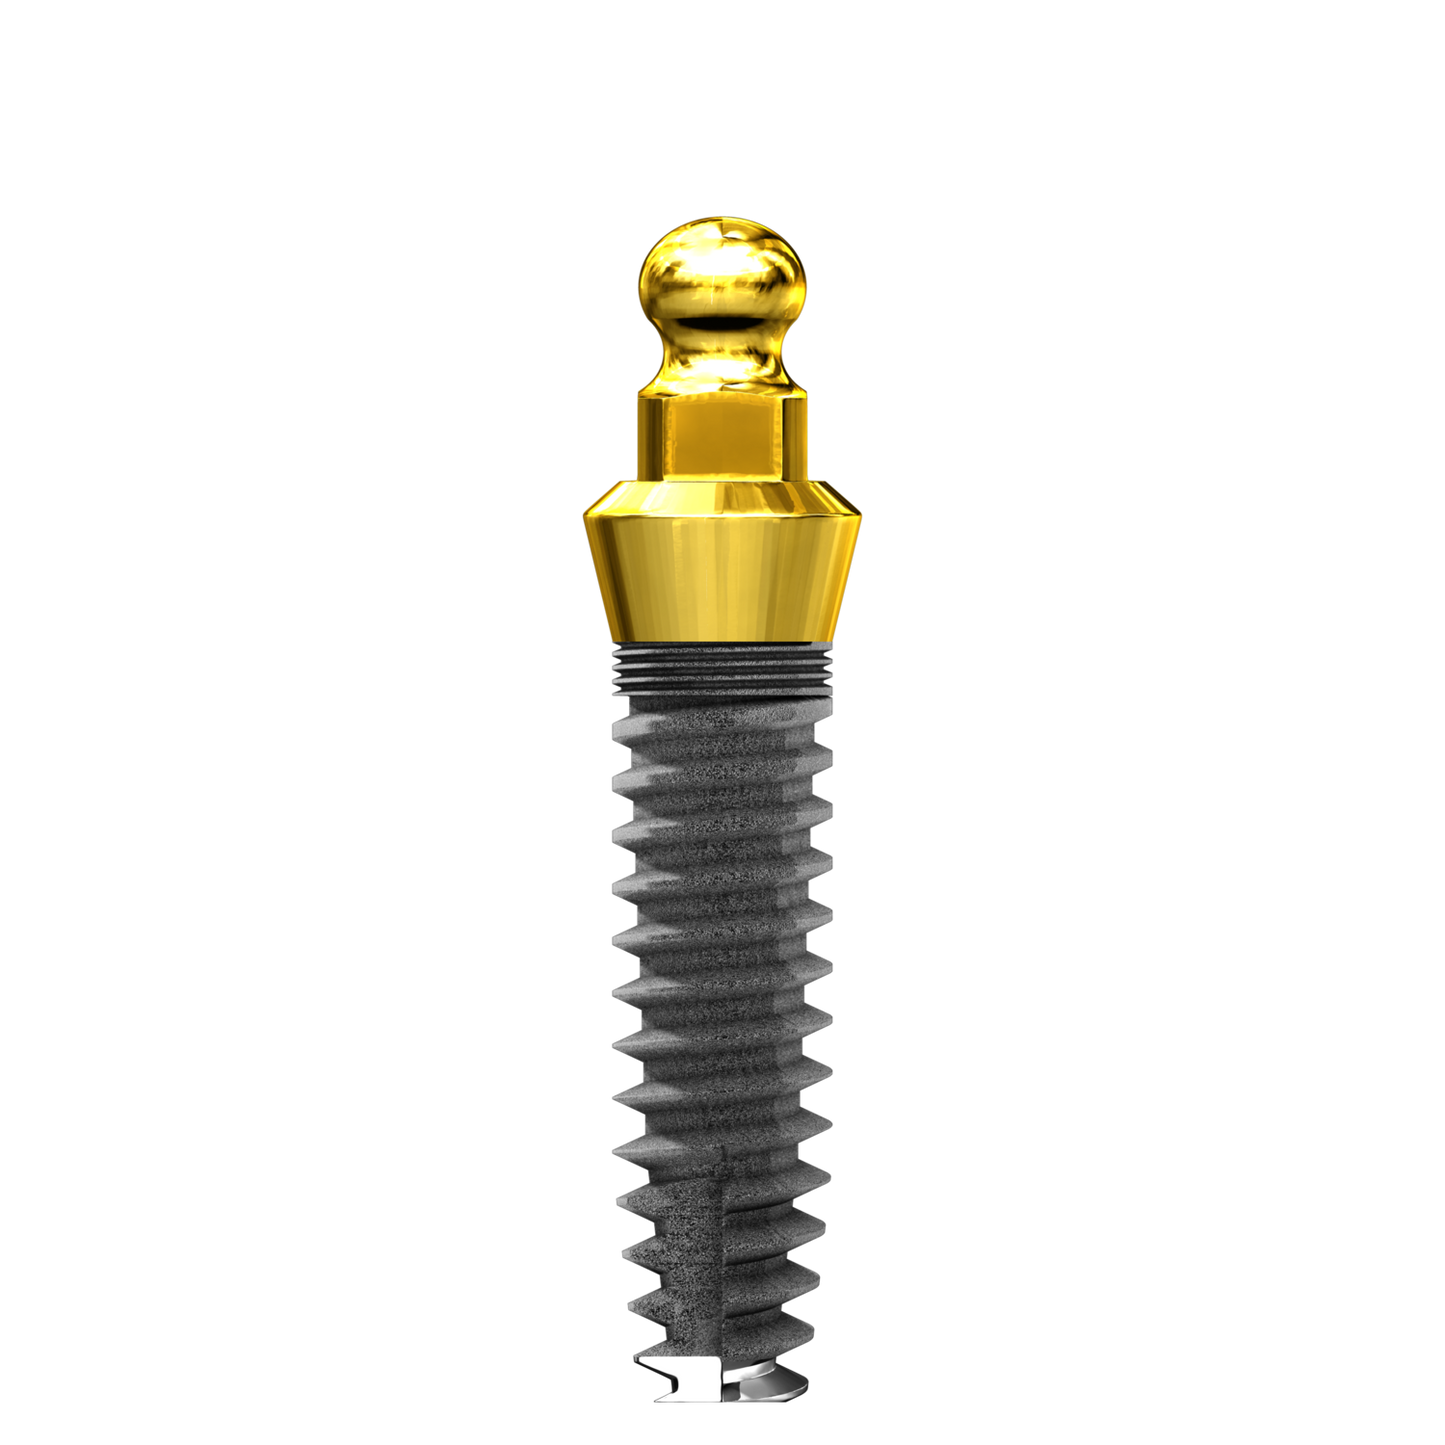 5.0mm x 12mm ISI O-Ball One Piece Implant